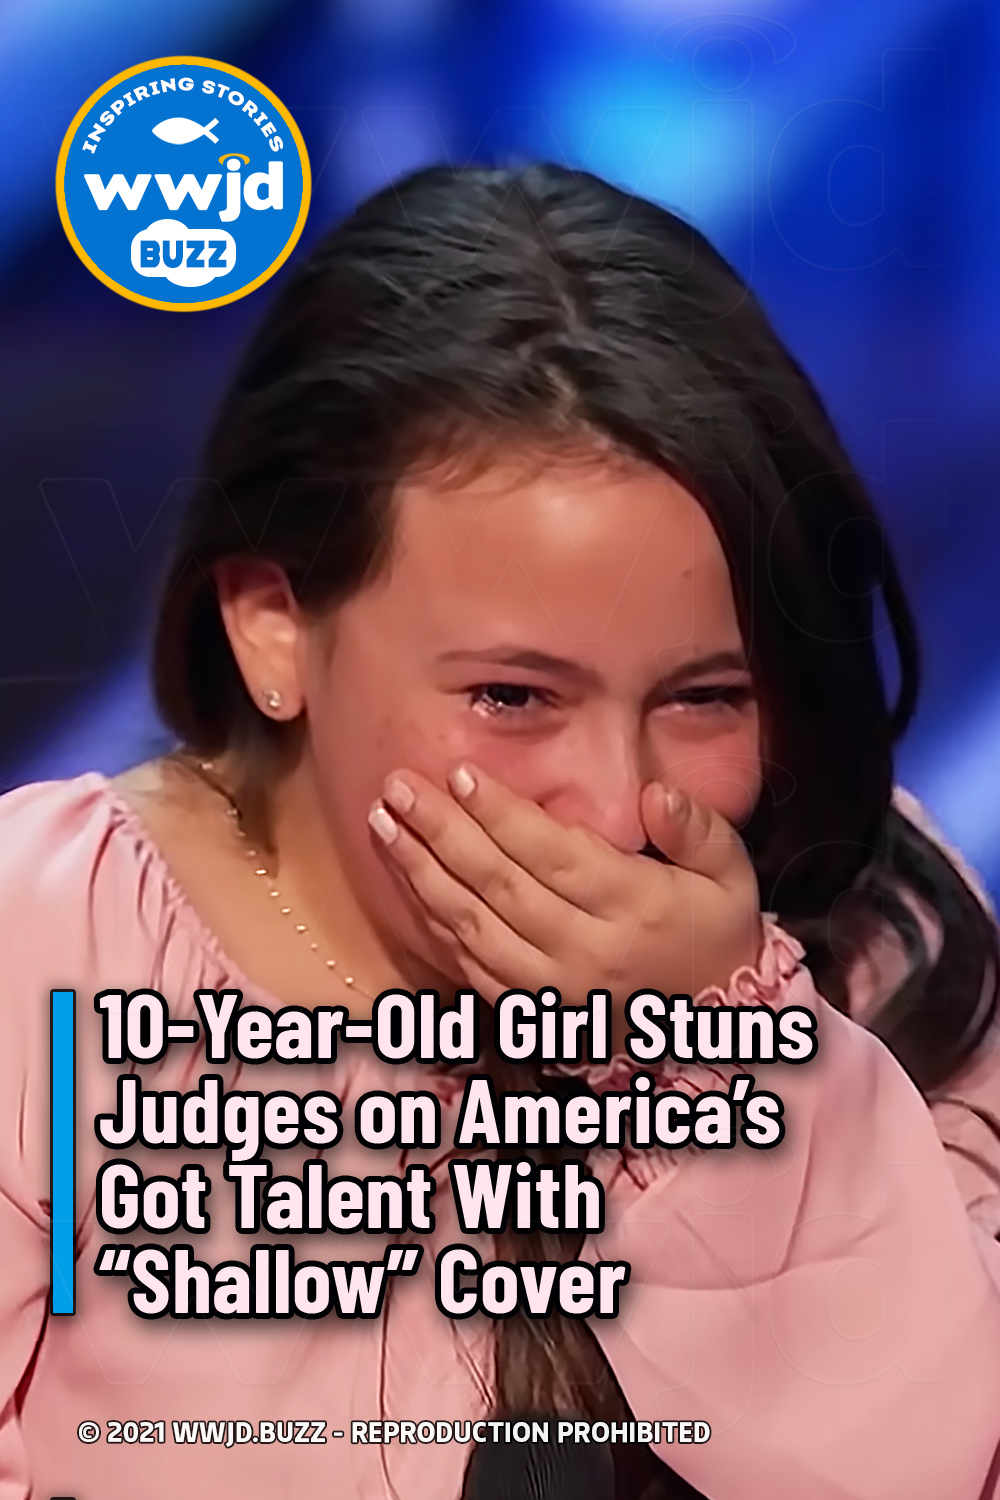 10-Year-Old Girl Stuns Judges on America’s Got Talent With “Shallow” Cover